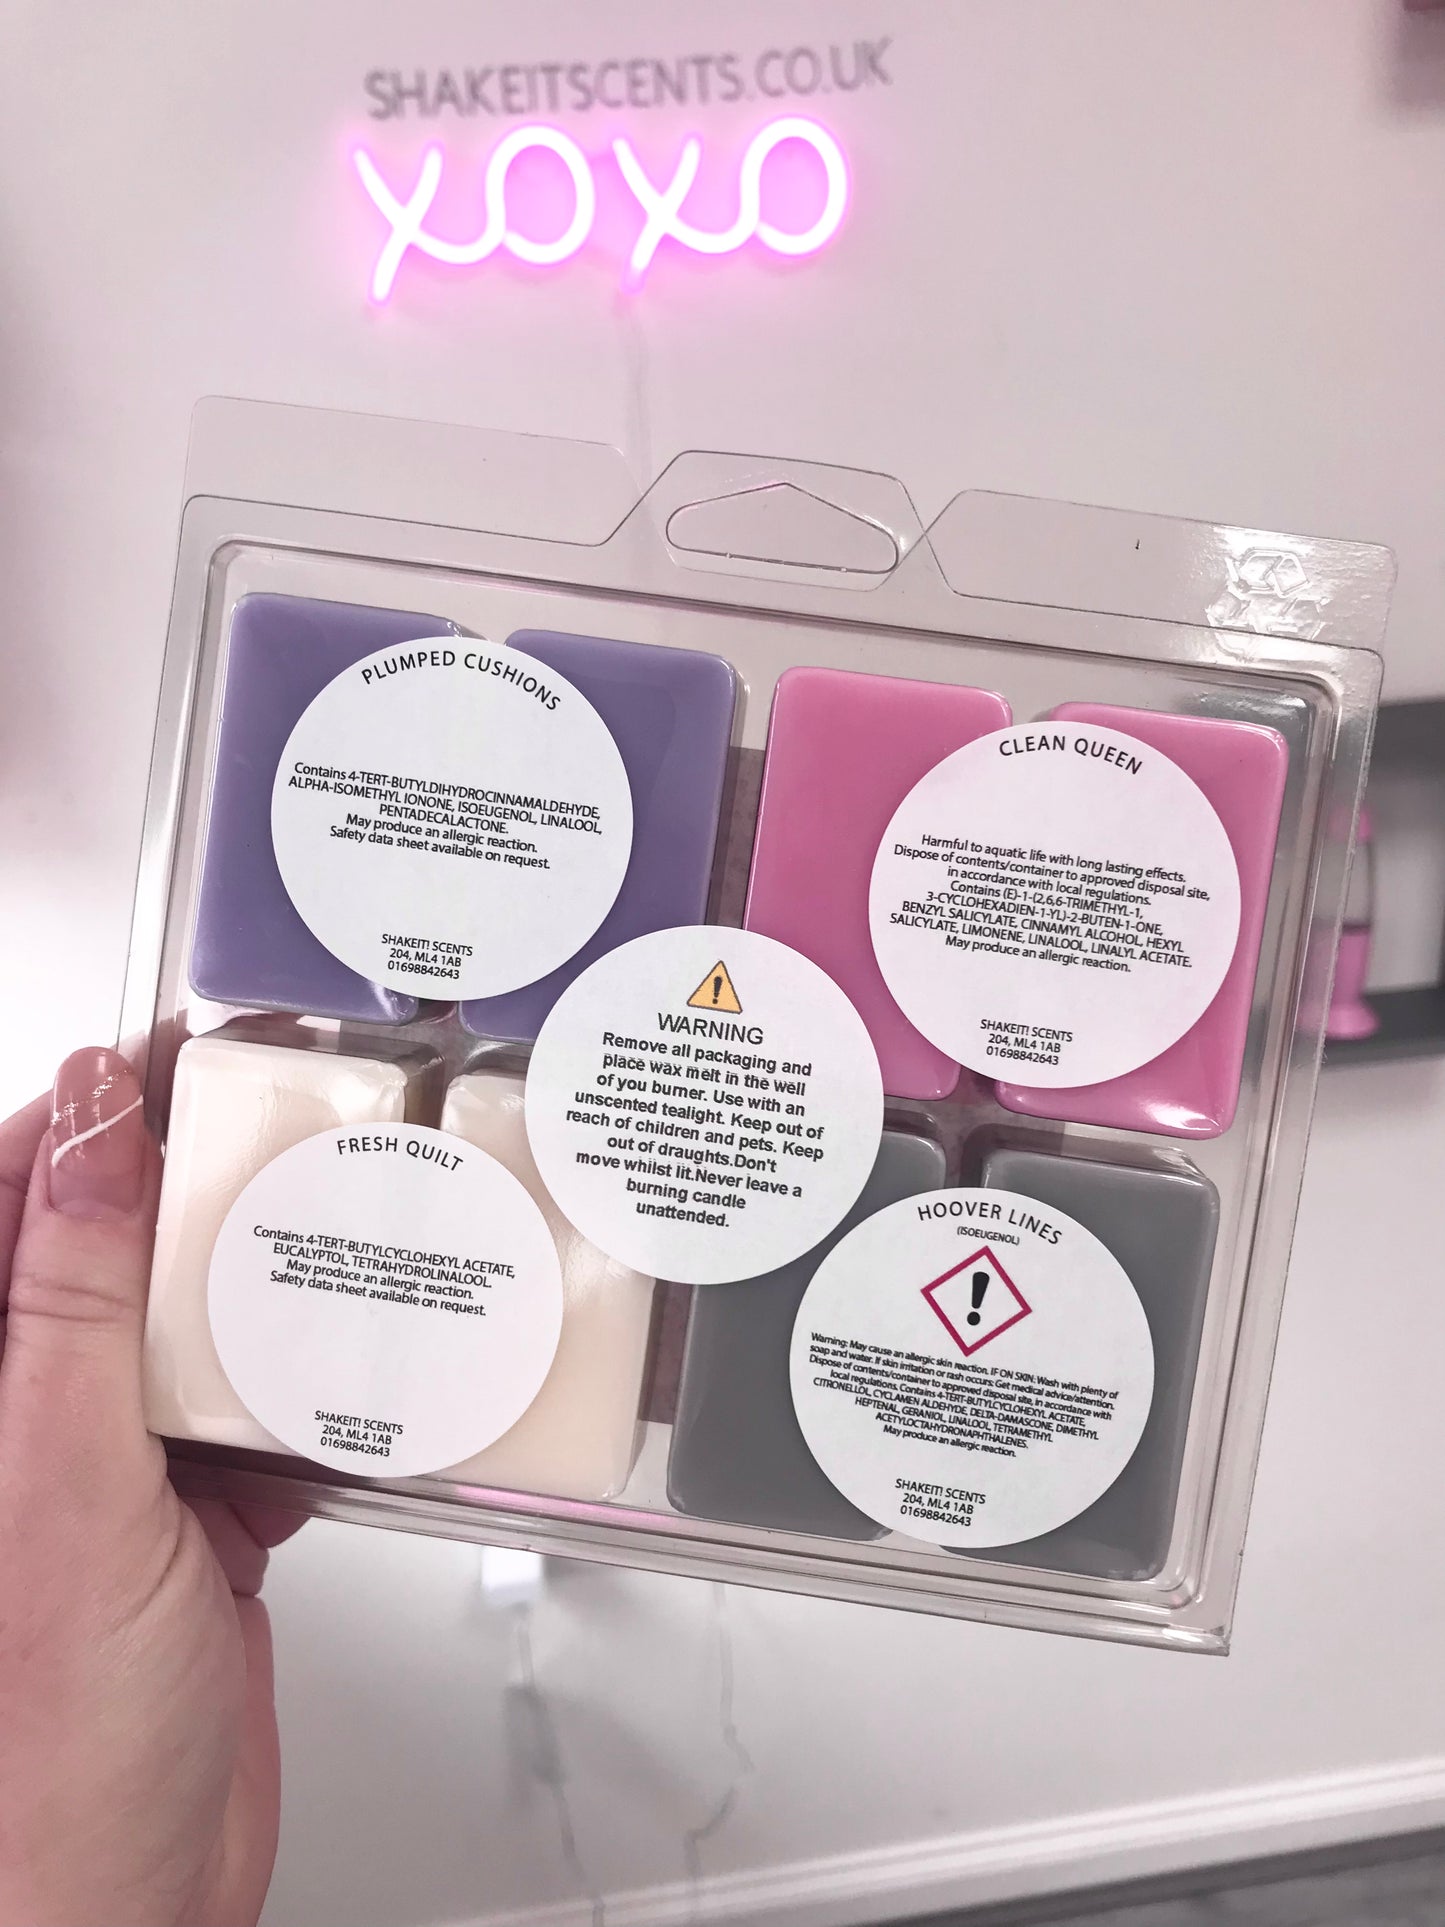 SHAKEIT! SCENTS COLLECTION BOXES - RANDOM SCENTS.